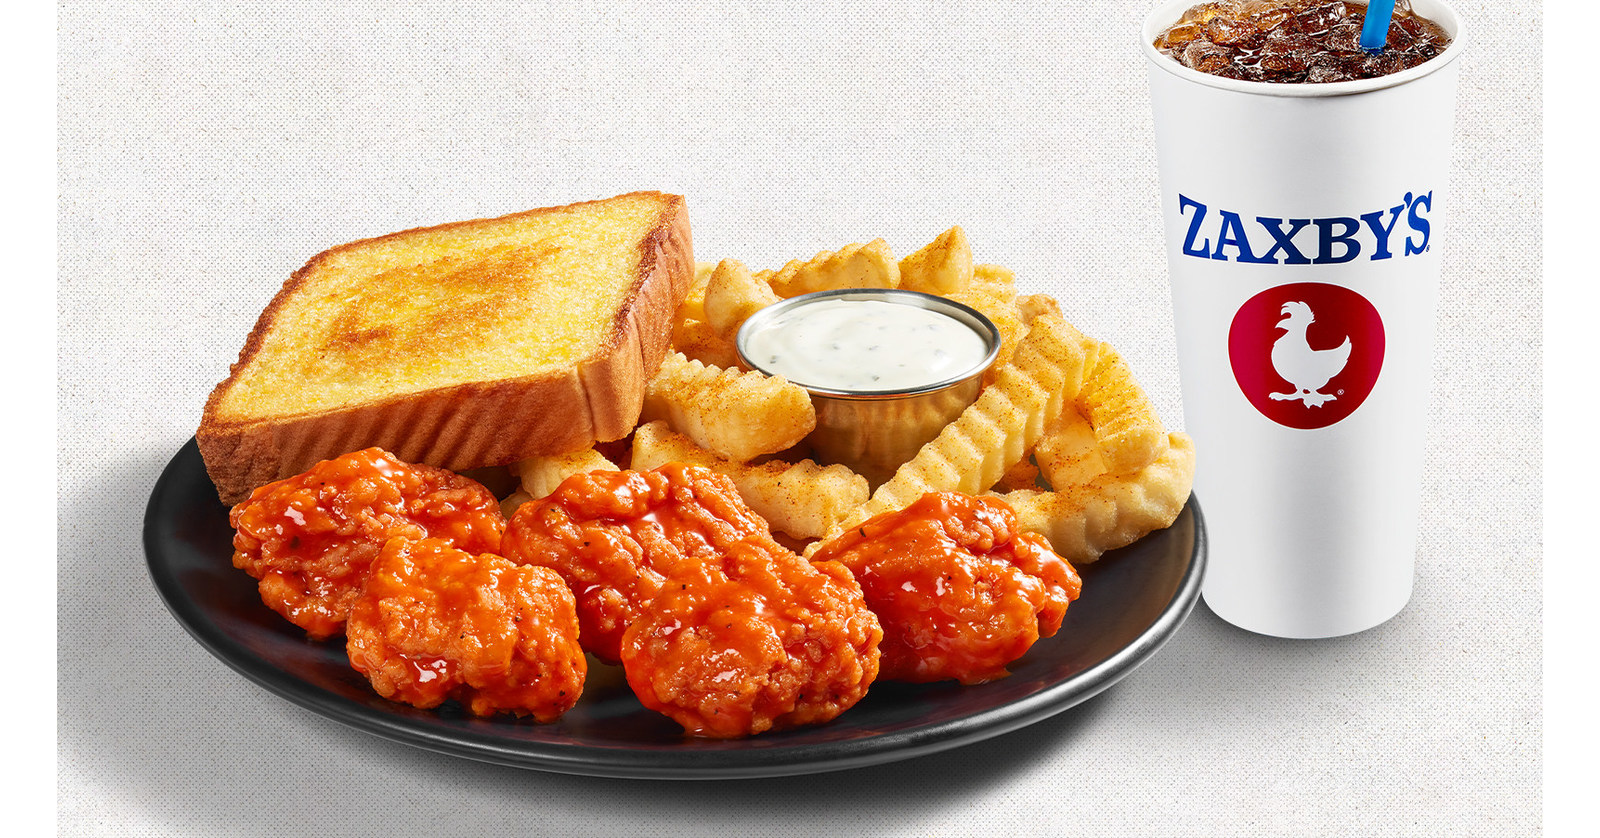 Signature dish of zaxby's, chicken fingers